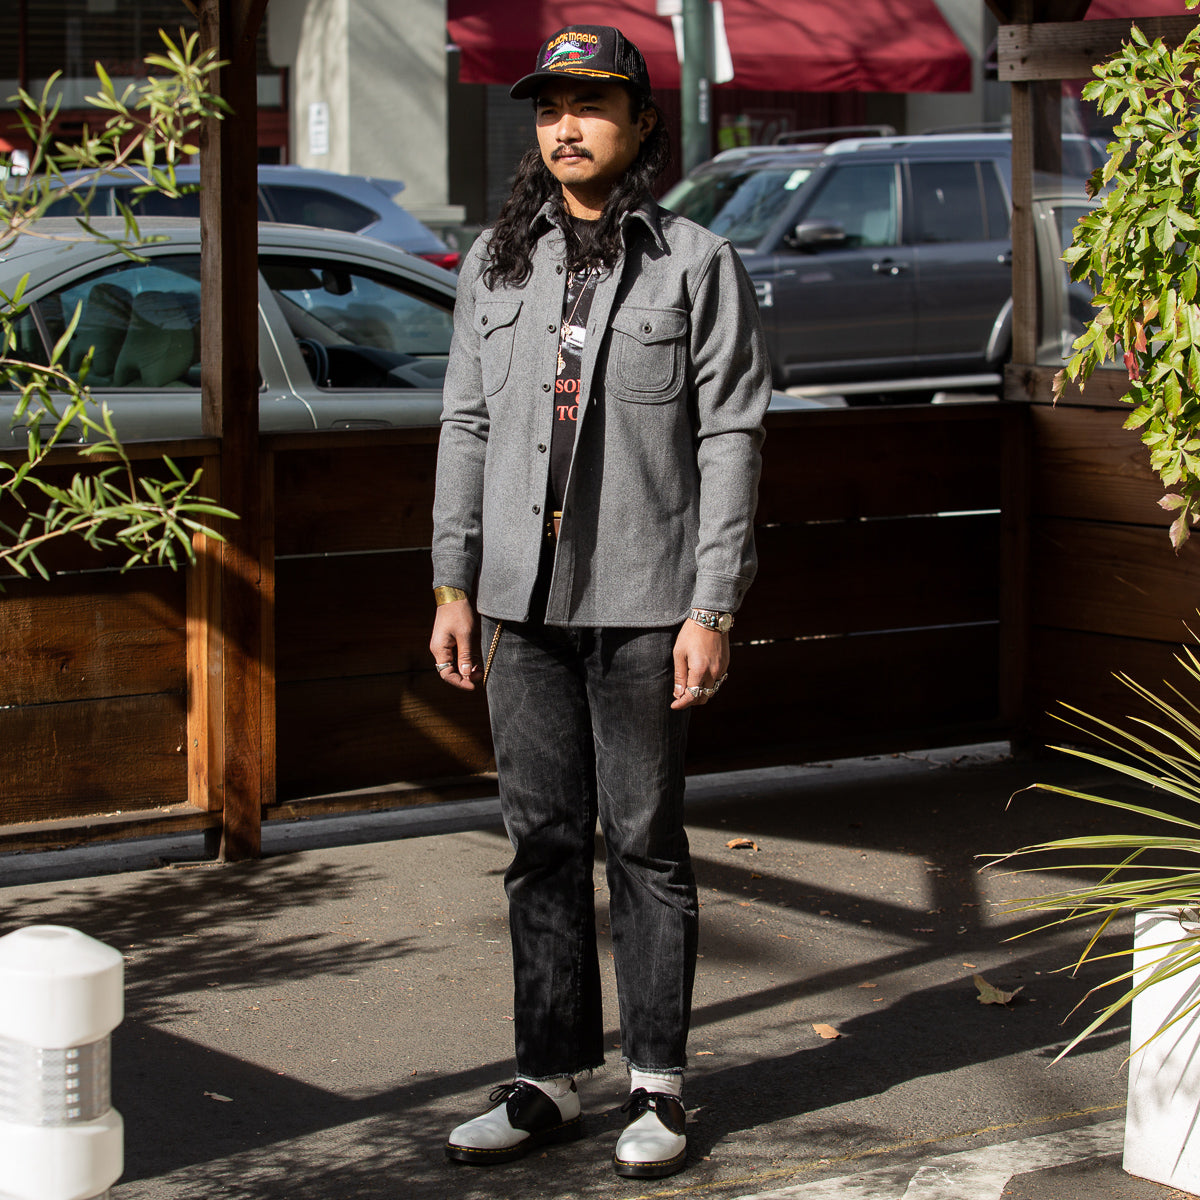 S&S x Runabout Goods Wool CPO Shirt